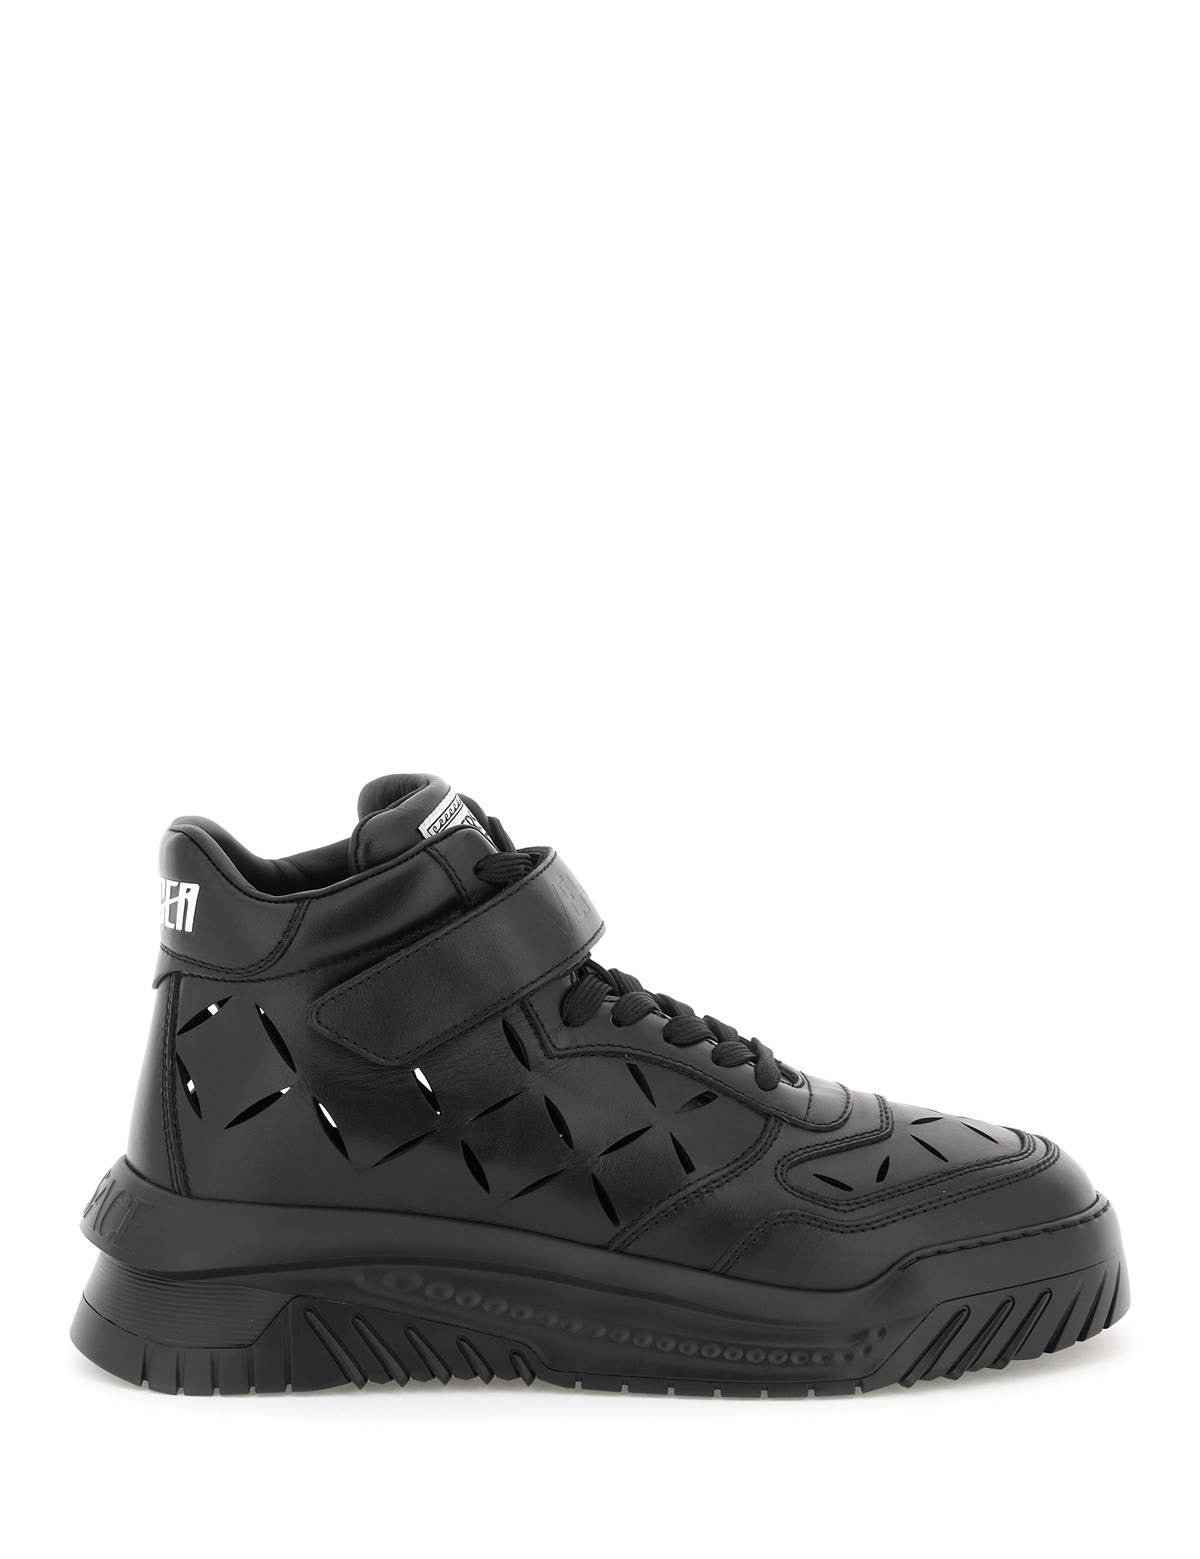 versace-odissea-sneakers-with-cut-outs_8fd8a871-c324-49ee-a043-224a4bdb350f.jpg